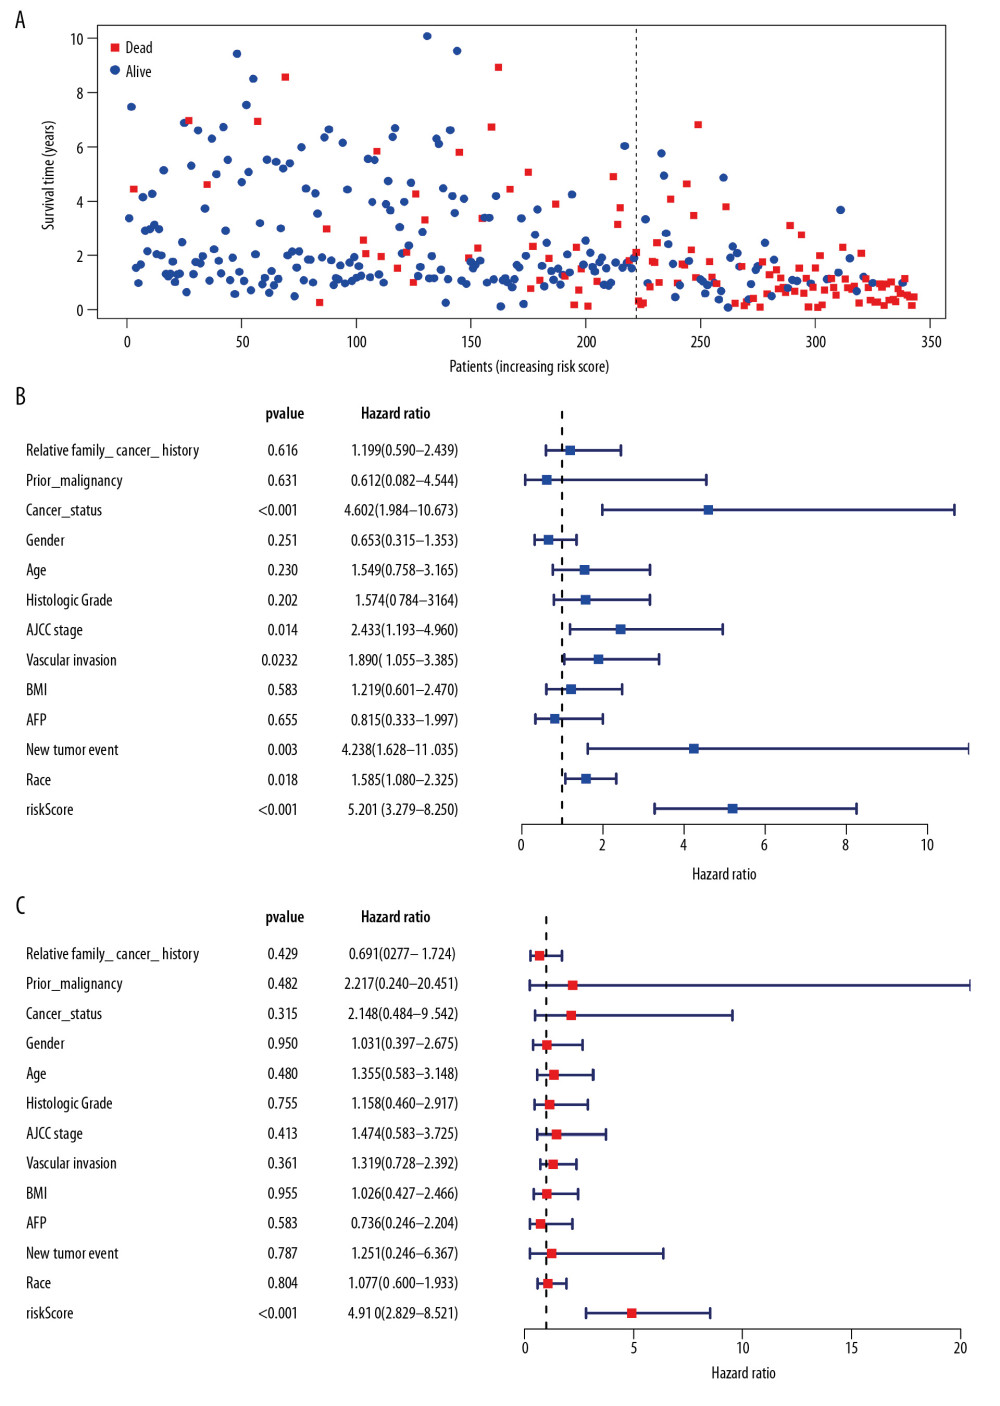 Independent validation of the prognostic model. (A) Survival status of patients in the TCGA cohort. (B) Univariate cox regression analyses of the association between clinicopathological factors and OS. (C) Multivariate Cox regression analyses of the association between clinicopathological factors and OS.